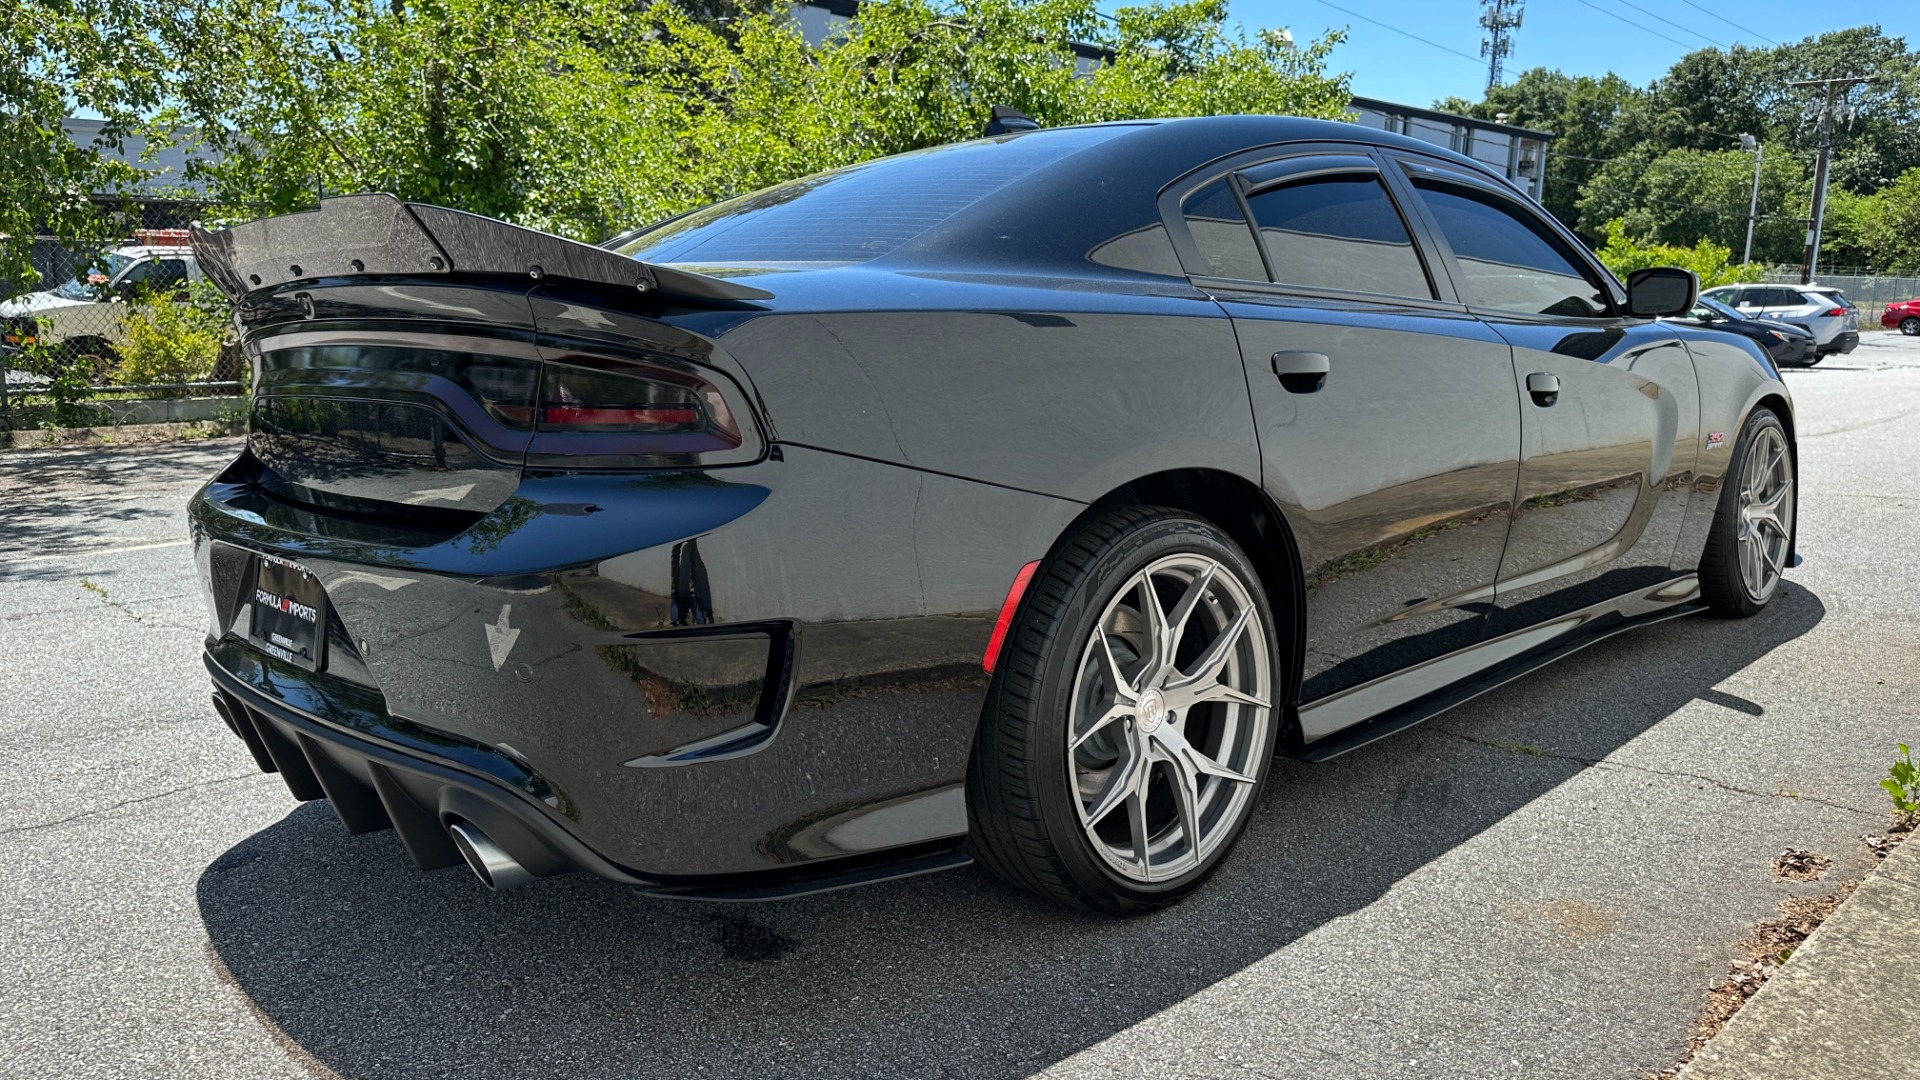 Used 2020 Dodge Charger SCAT PACK / UPGRADED WHEELS / UPGRADED AERO / CLOTH INTERIOR for sale $47,995 at Formula Imports in Charlotte NC 28227 4